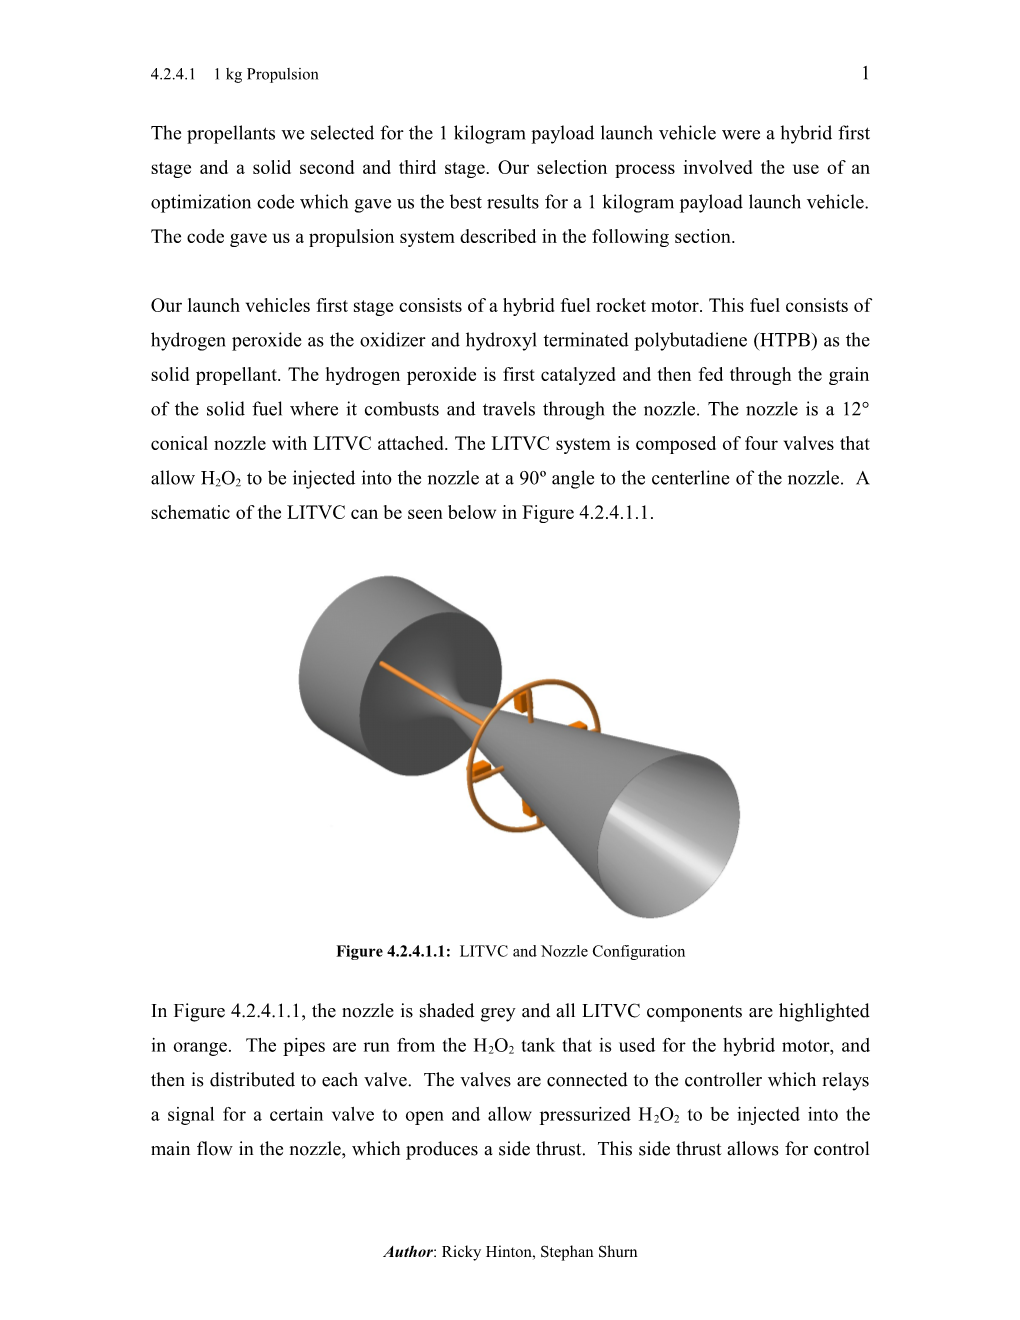 We Decided to Go with a Propulsion System for the 1 Kg Payload Consisting of a Hybrid First